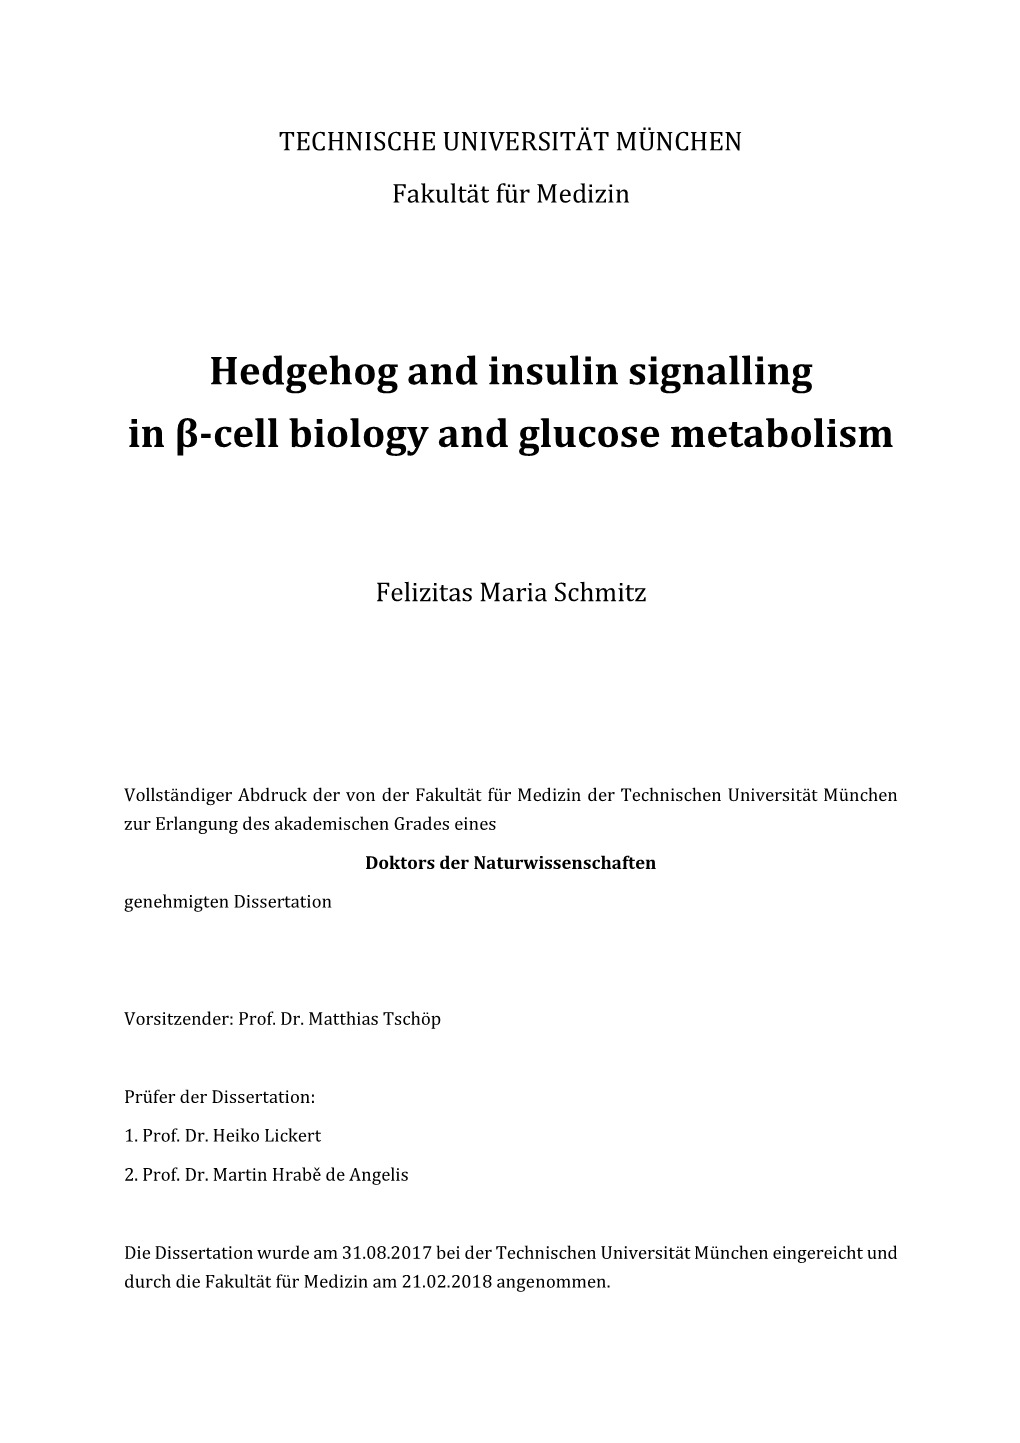 Hedgehog and Insulin Signalling in Β-Cell Biology and Glucose Metabolism